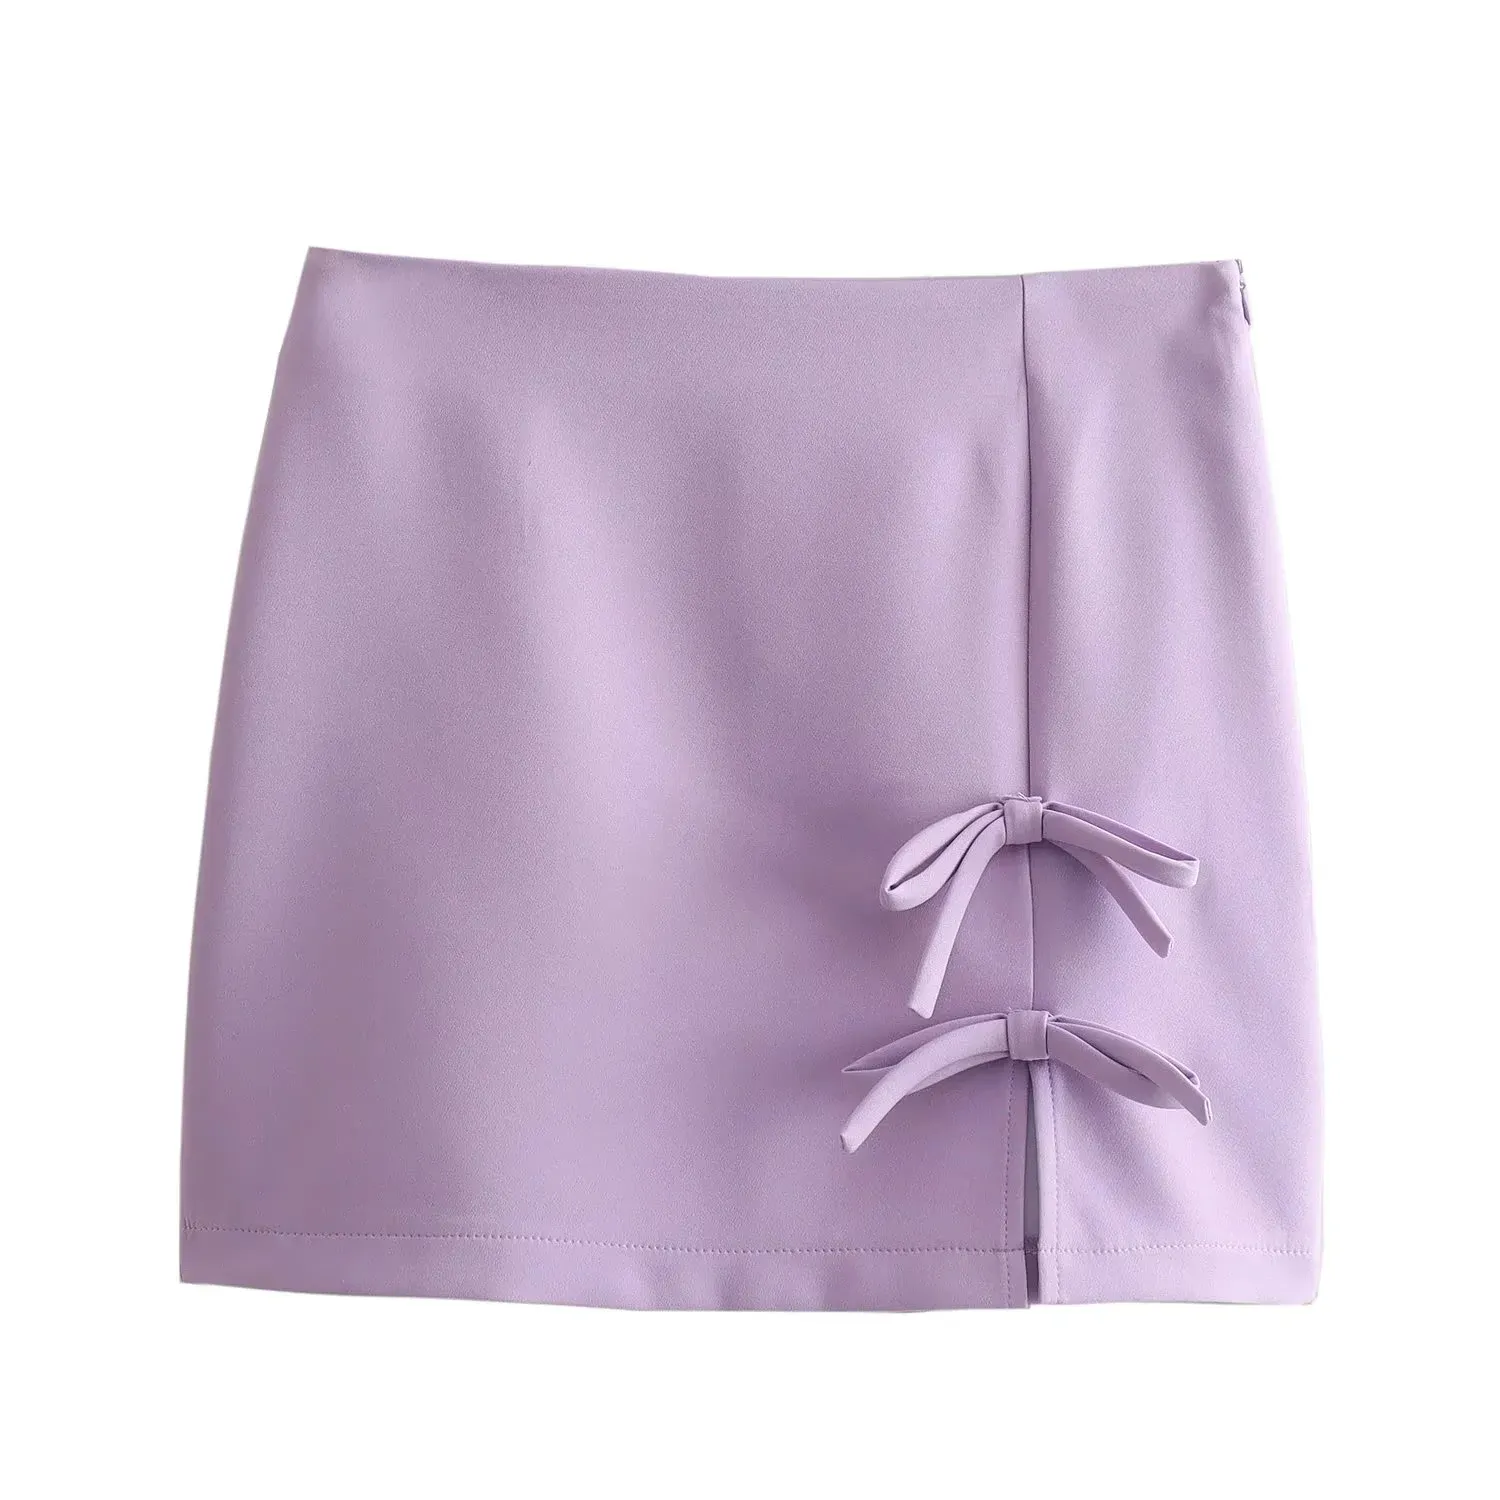 Front lace up side slit purple color zipper fly casual fashion mini skirt for women